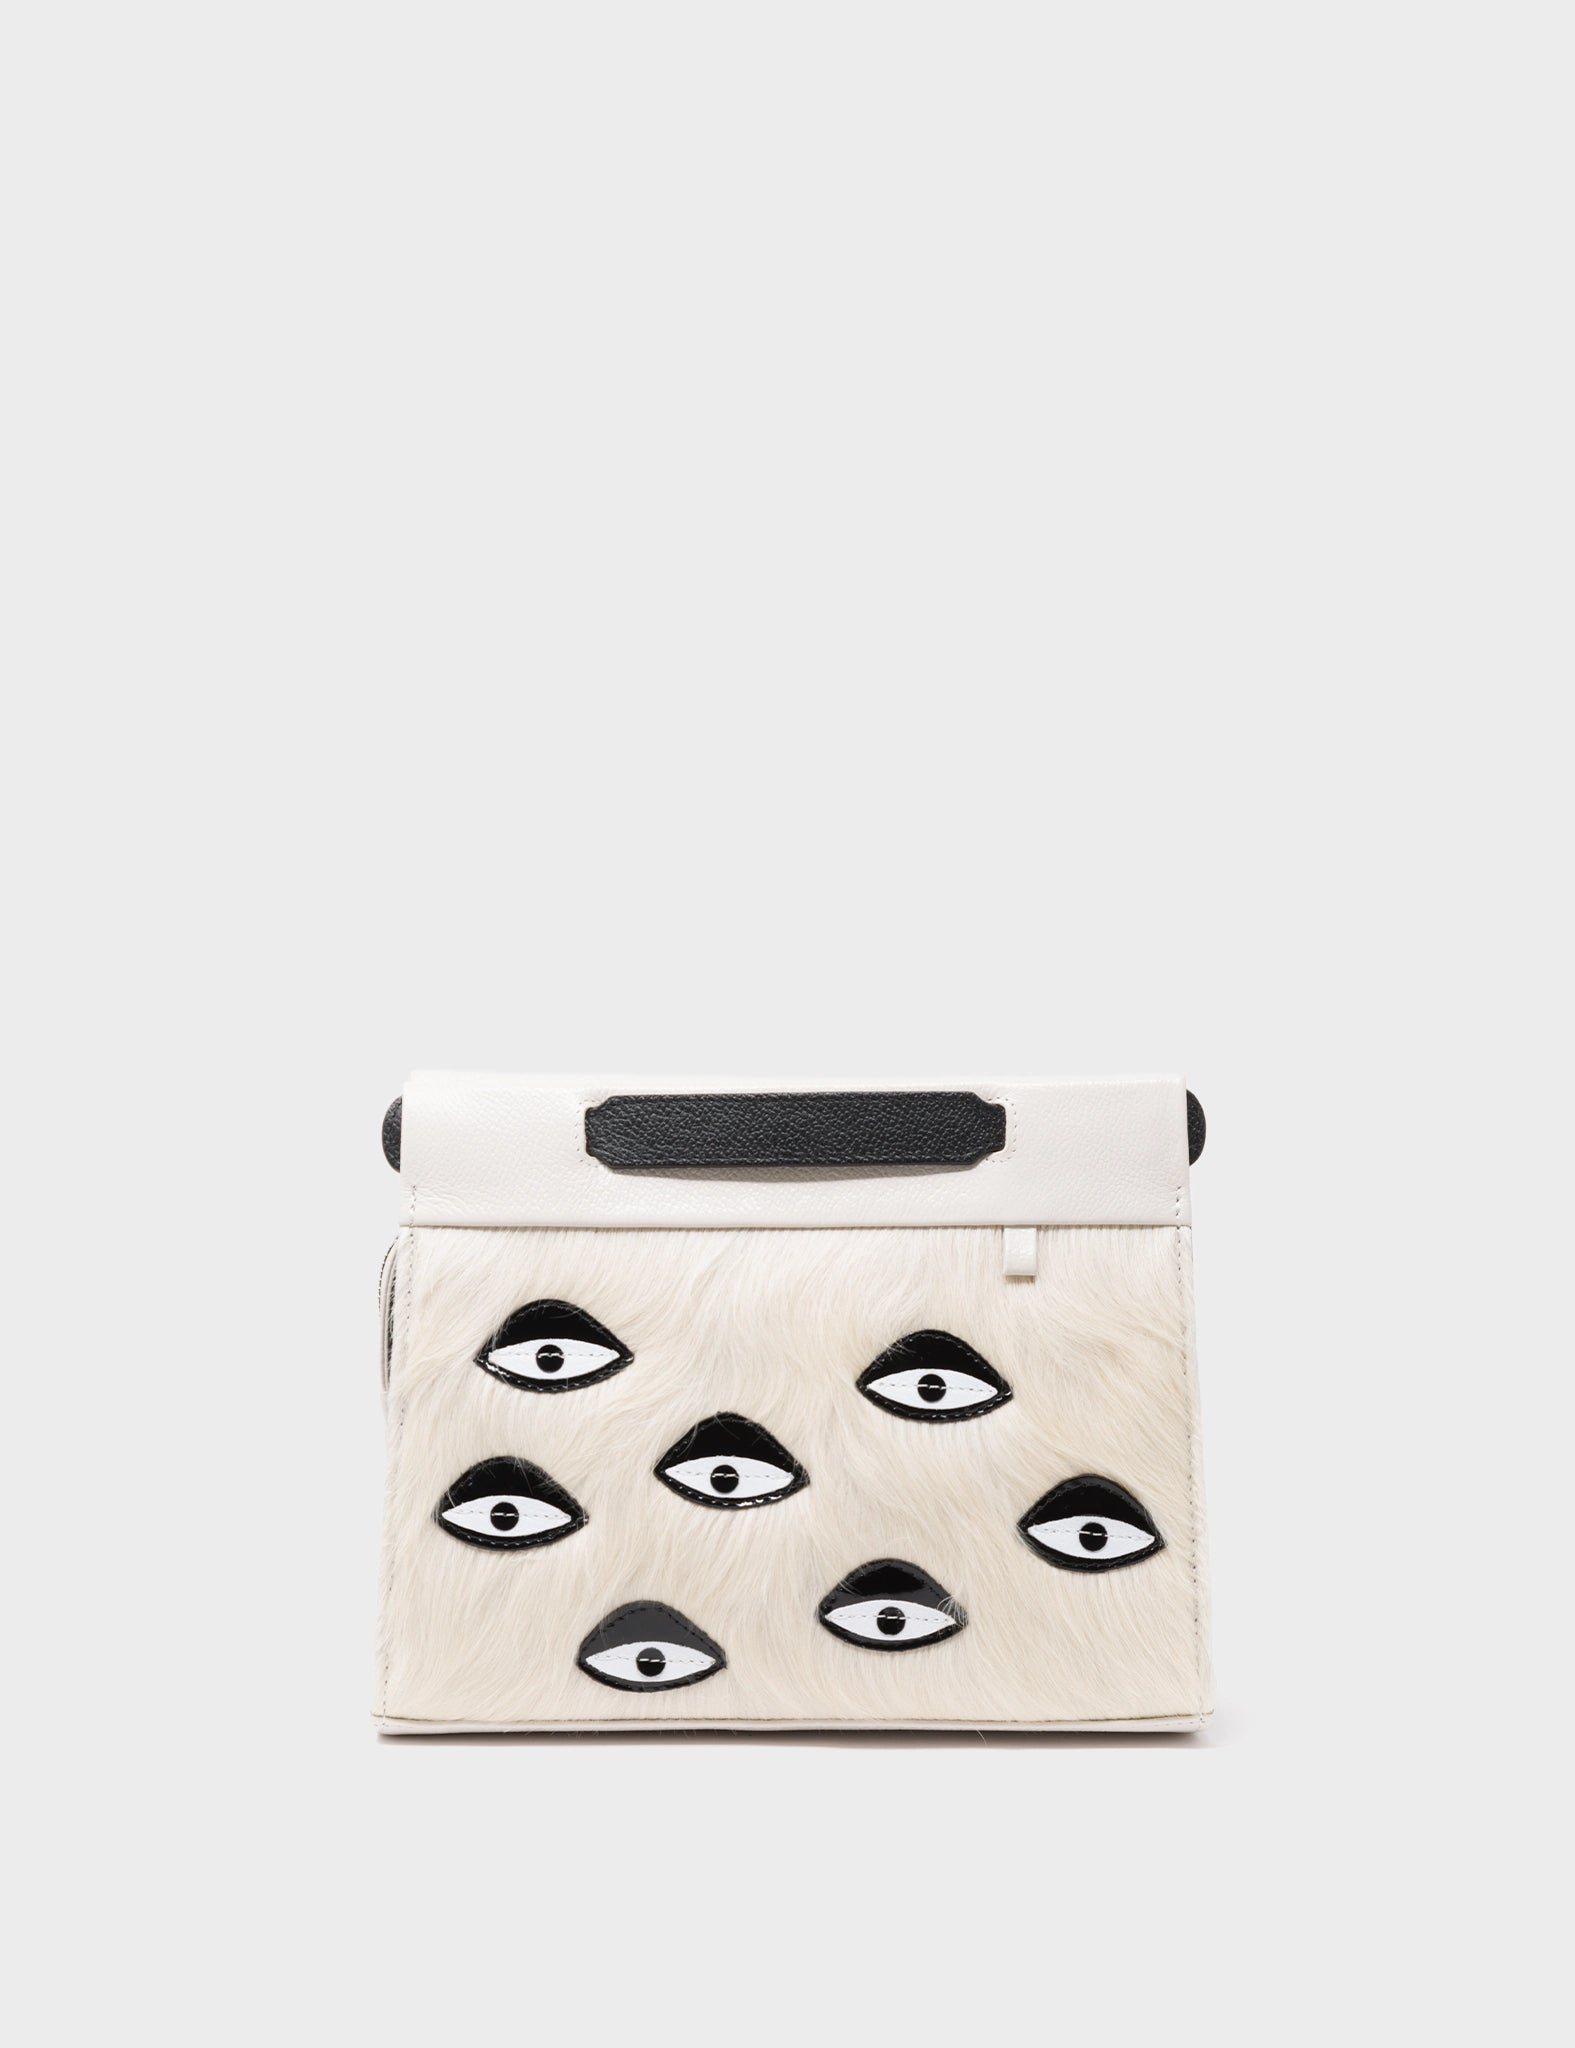 Vali Crossbody Small Cream Leather Bag - Eyes Applique Adjustable Handle - Front view